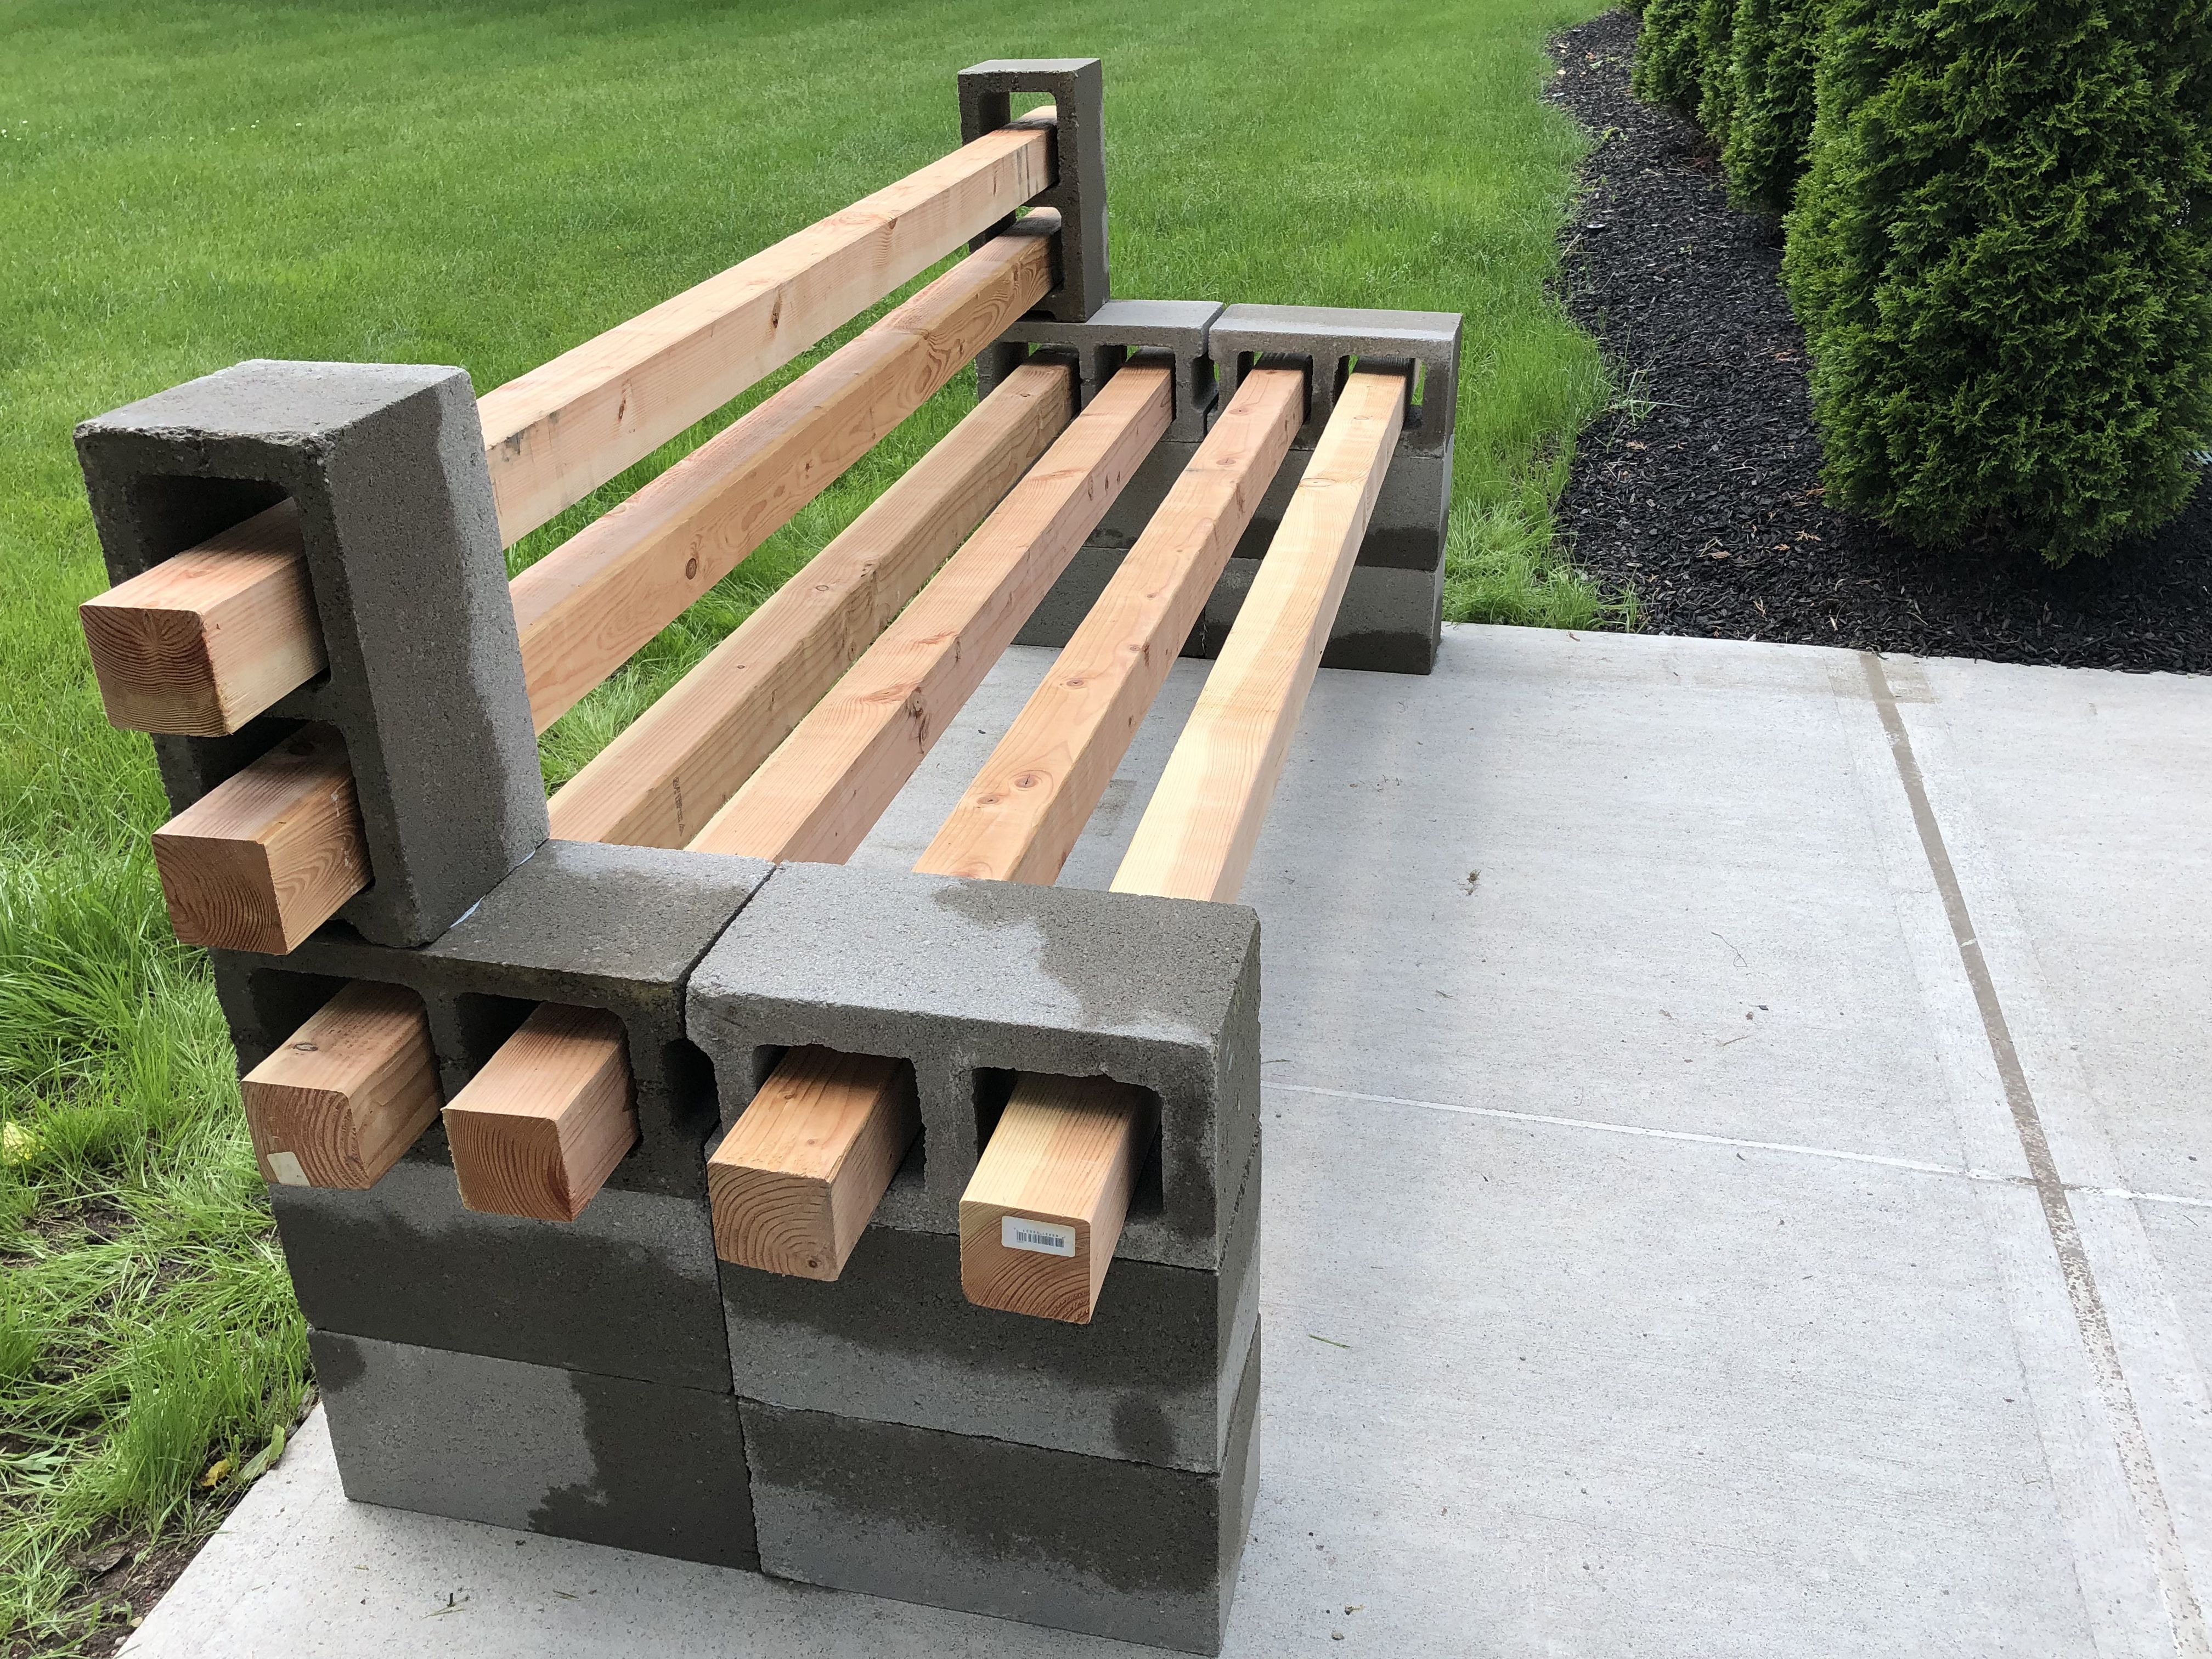 Concrete Block And Wood Bench